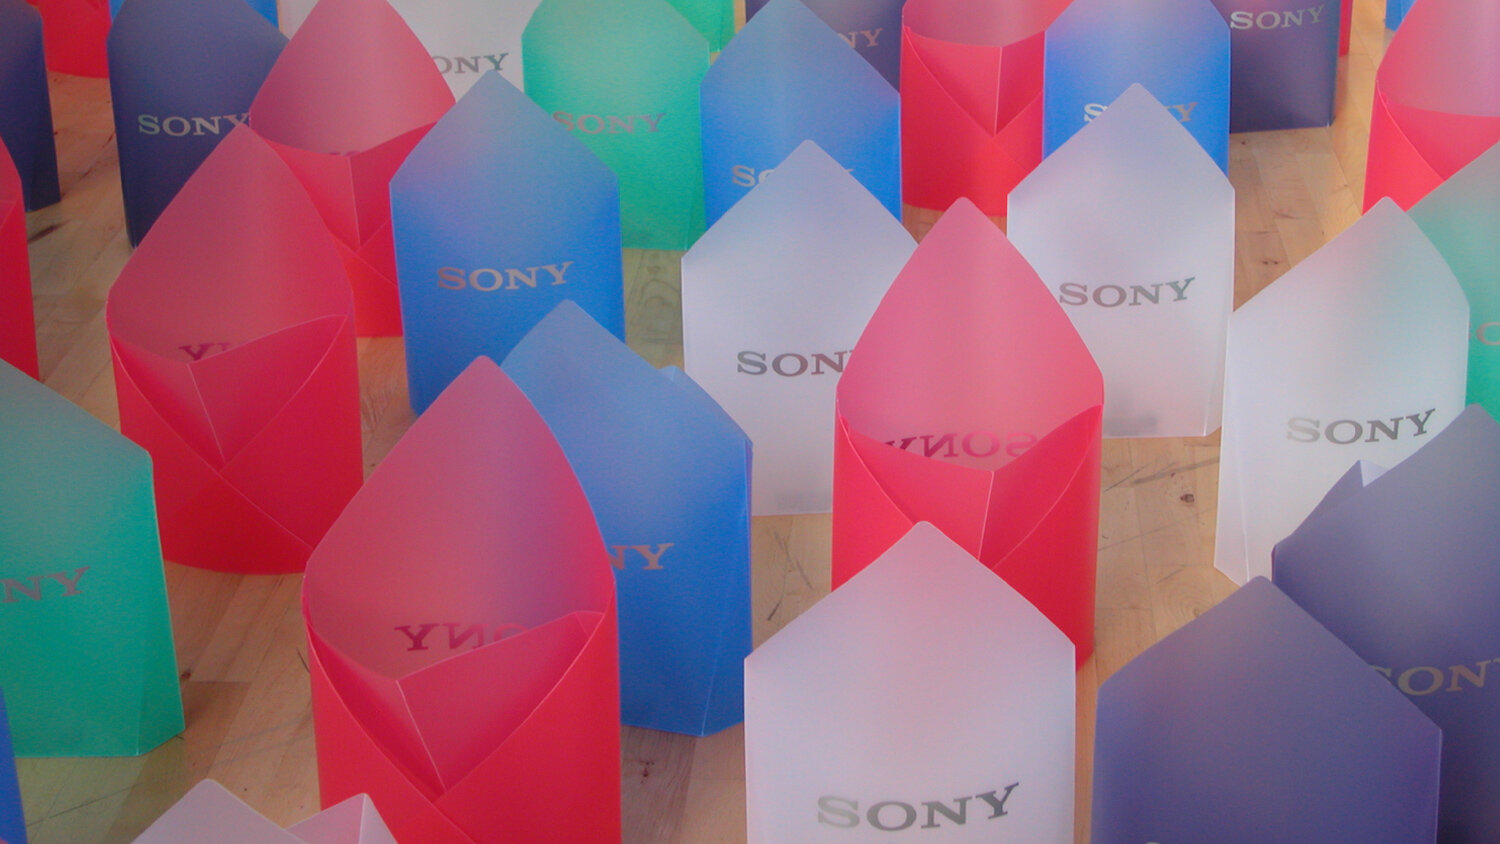 Blue-Marmalade-Made-to-order-branded-products-Sony-Polyrap-recycled-plastic-paper-bin.jpg